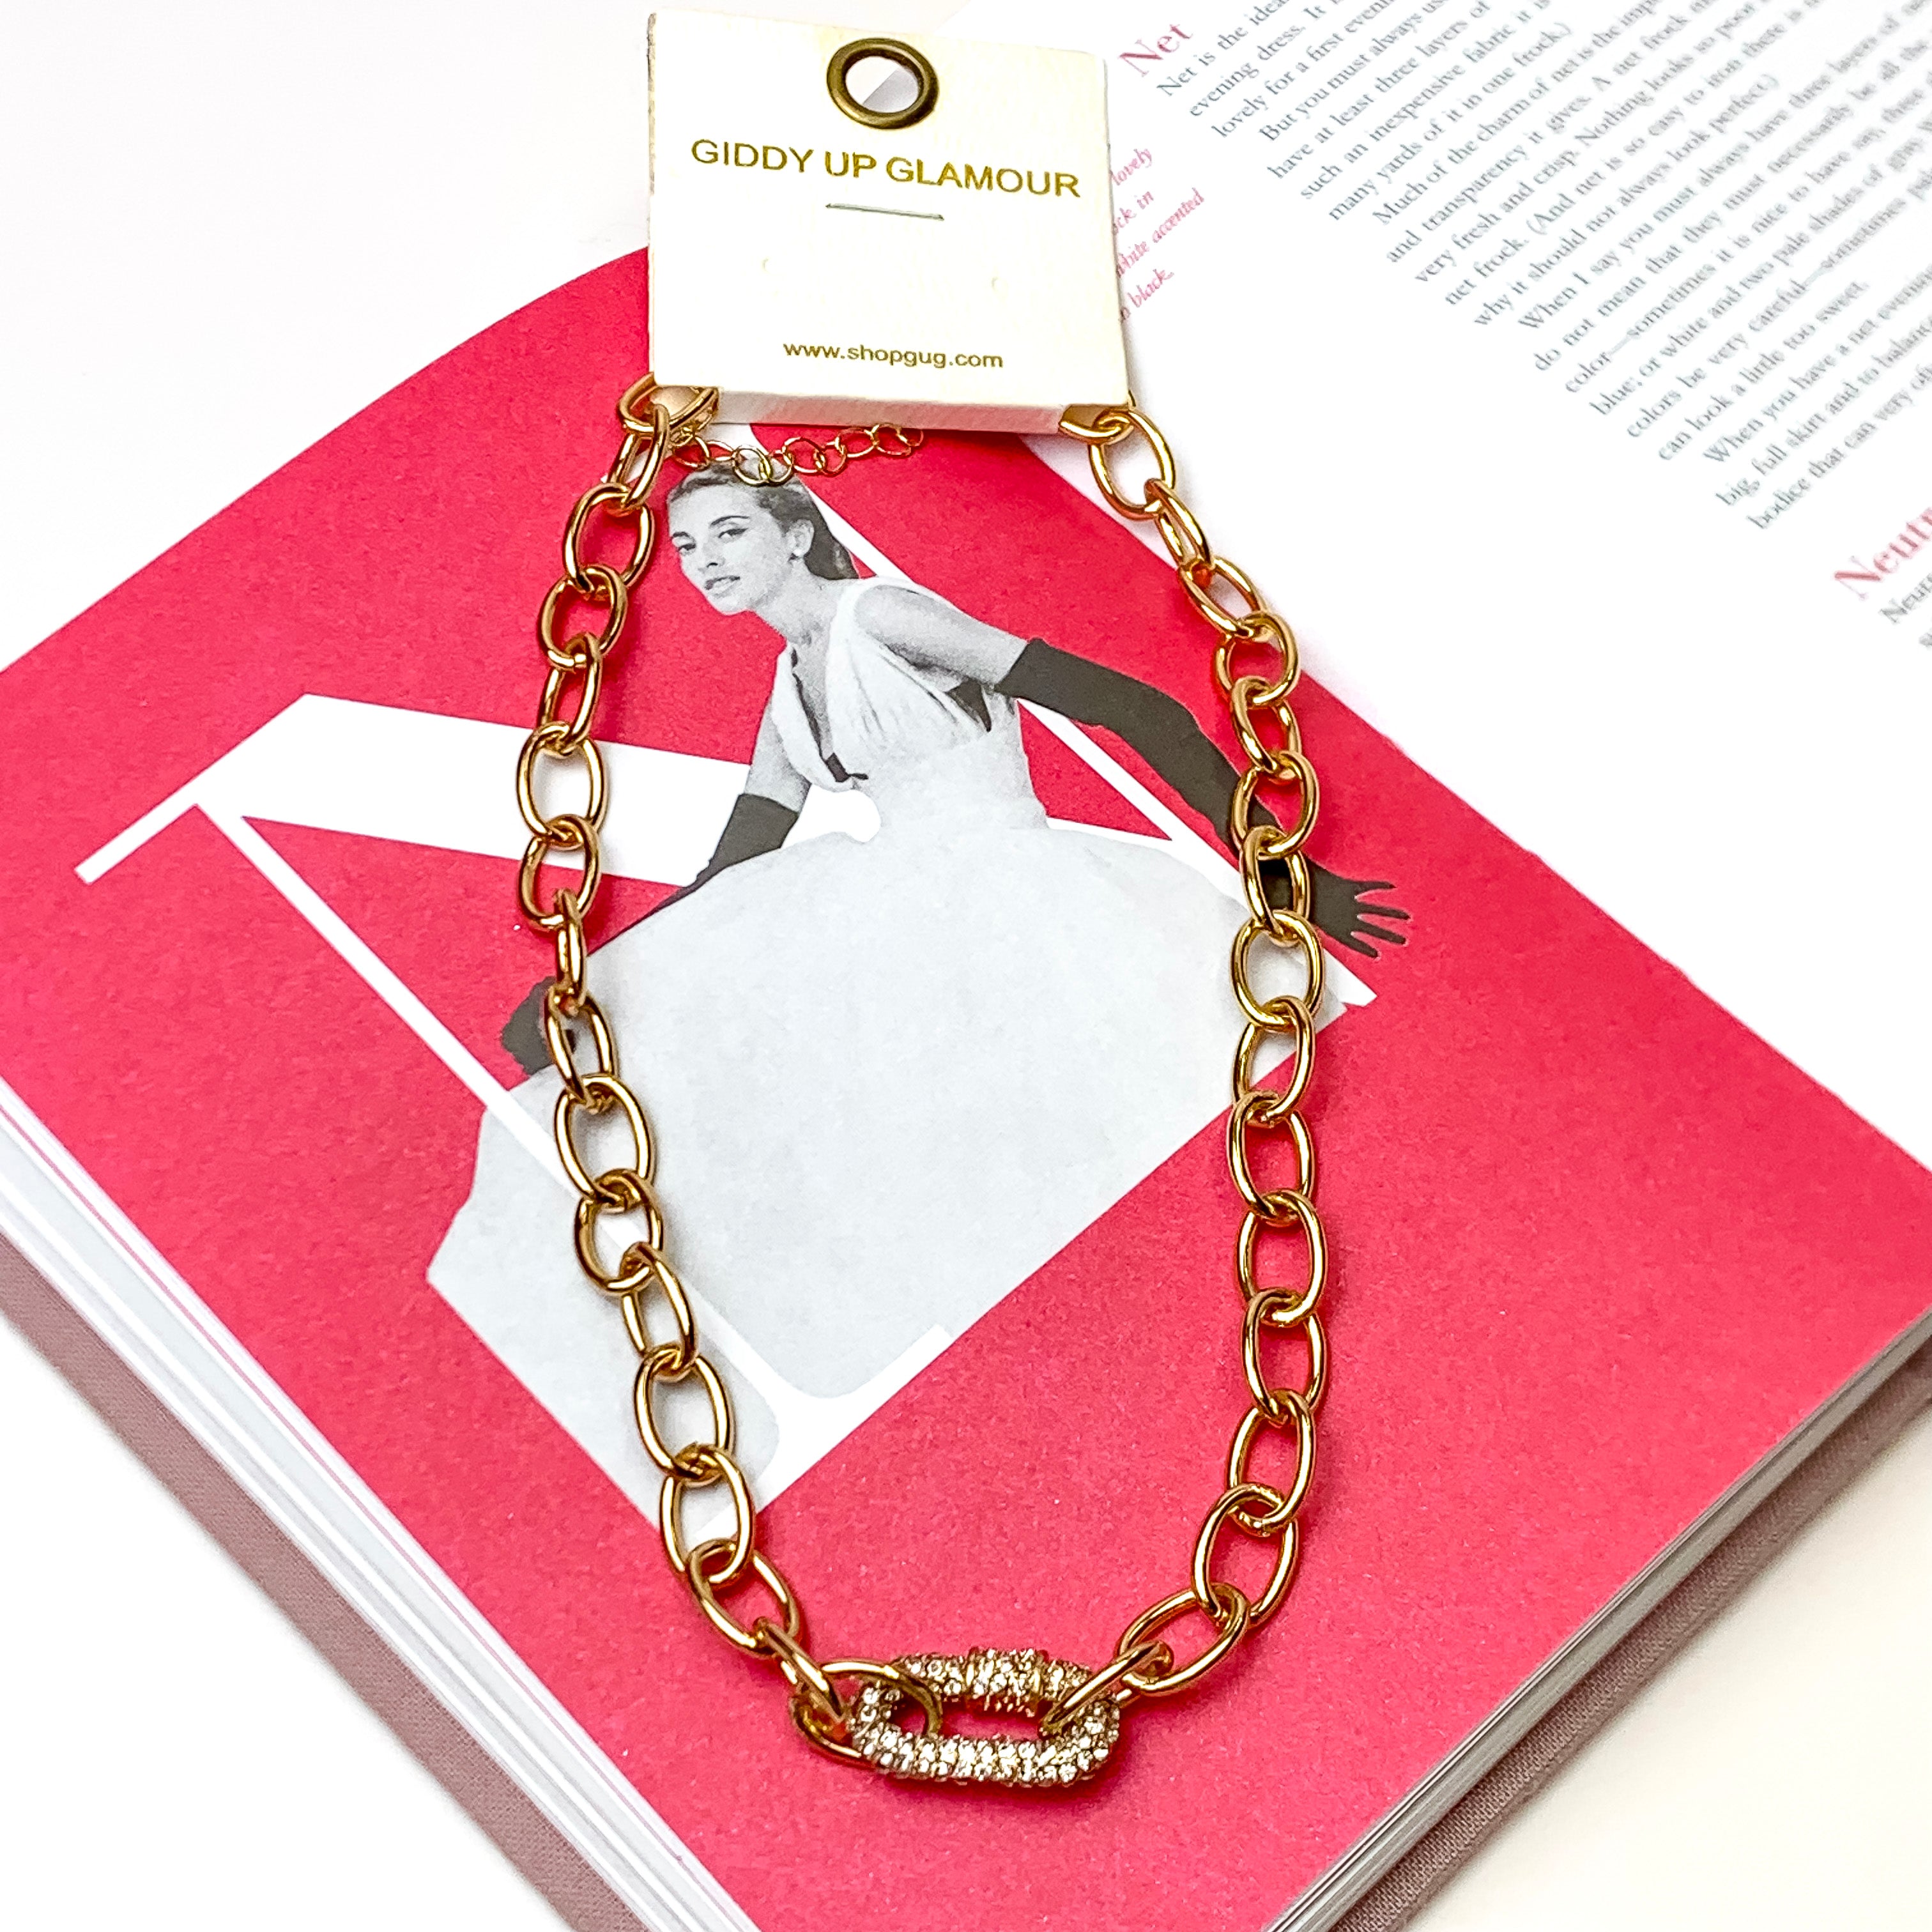 Chunky Chain Necklace with Pave Carabiner Accent in Gold - Giddy Up Glamour Boutique